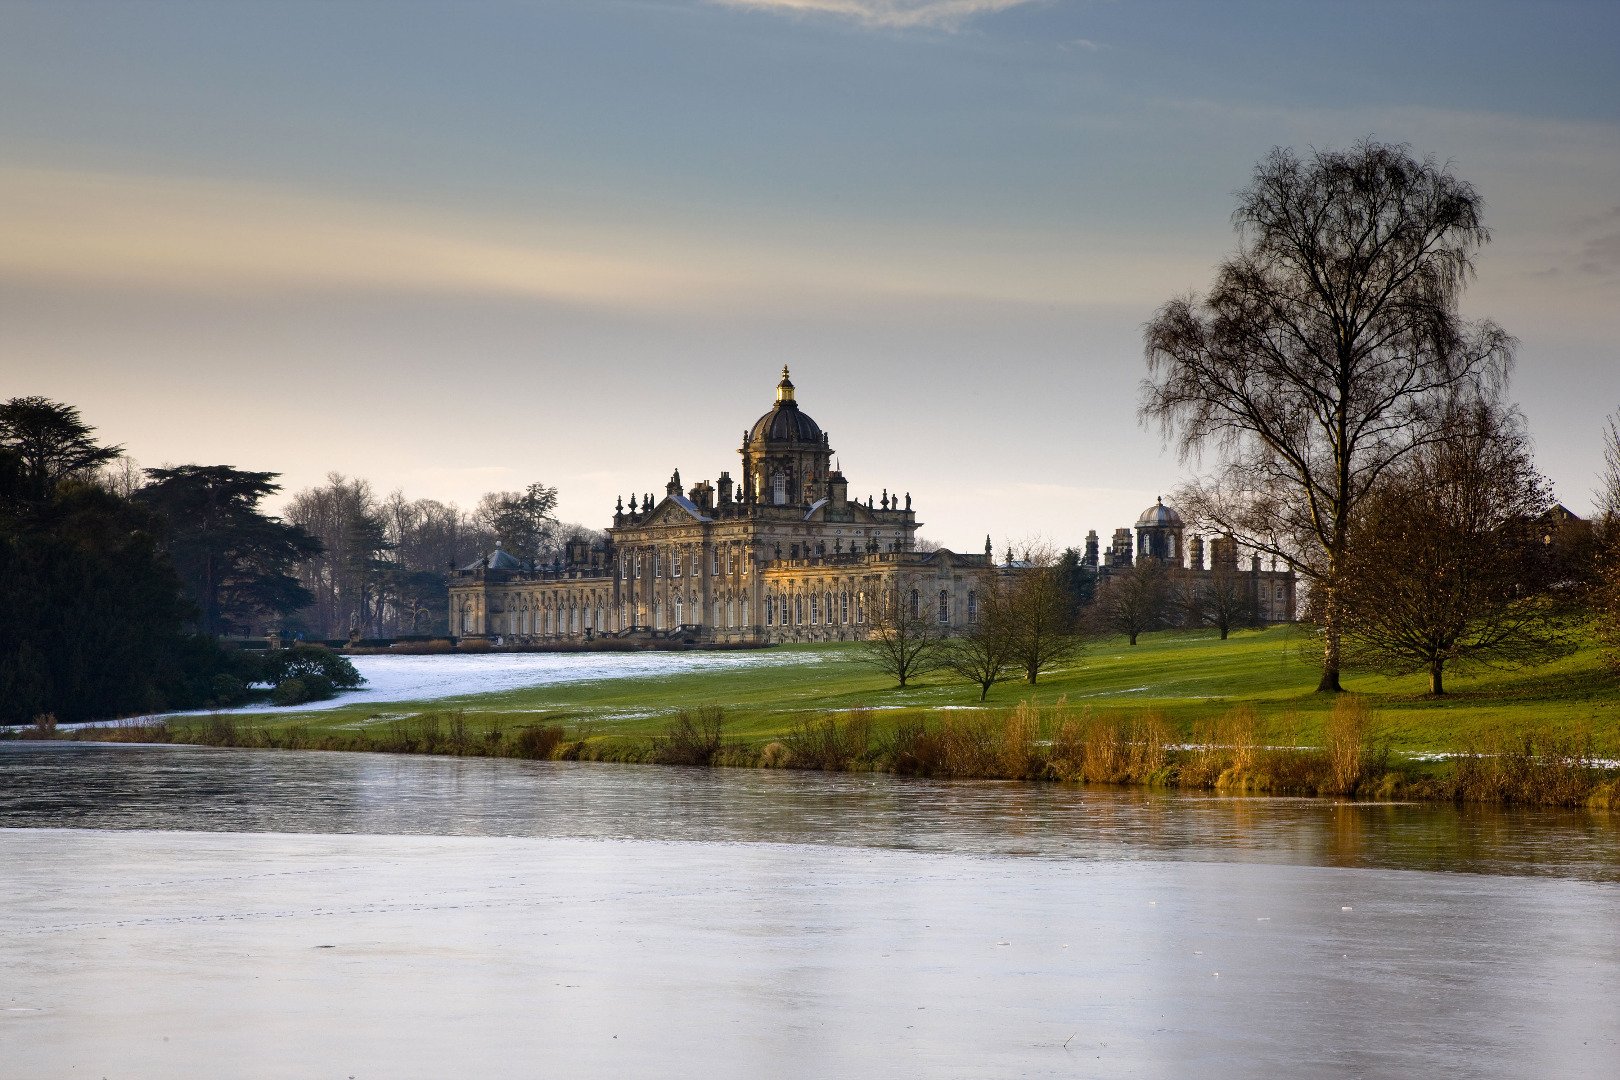 Image name castle howard and south lake mike kipling the 26 image from the post Yorkshire Stately Homes and Gardens in Yorkshire.com.